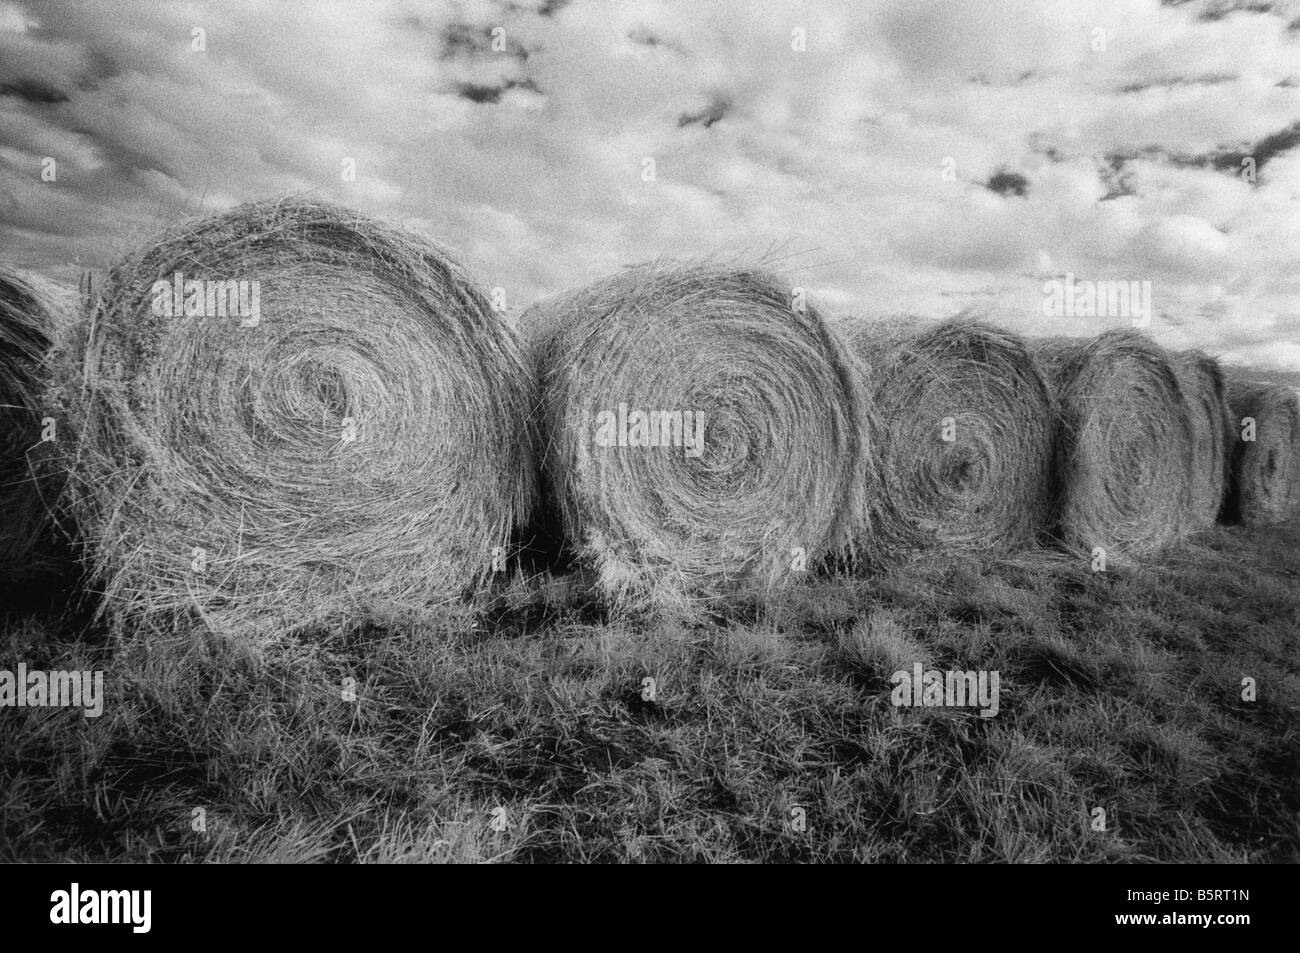 Washington, rolled Hay Bales, Back and White infrared Stock Photo